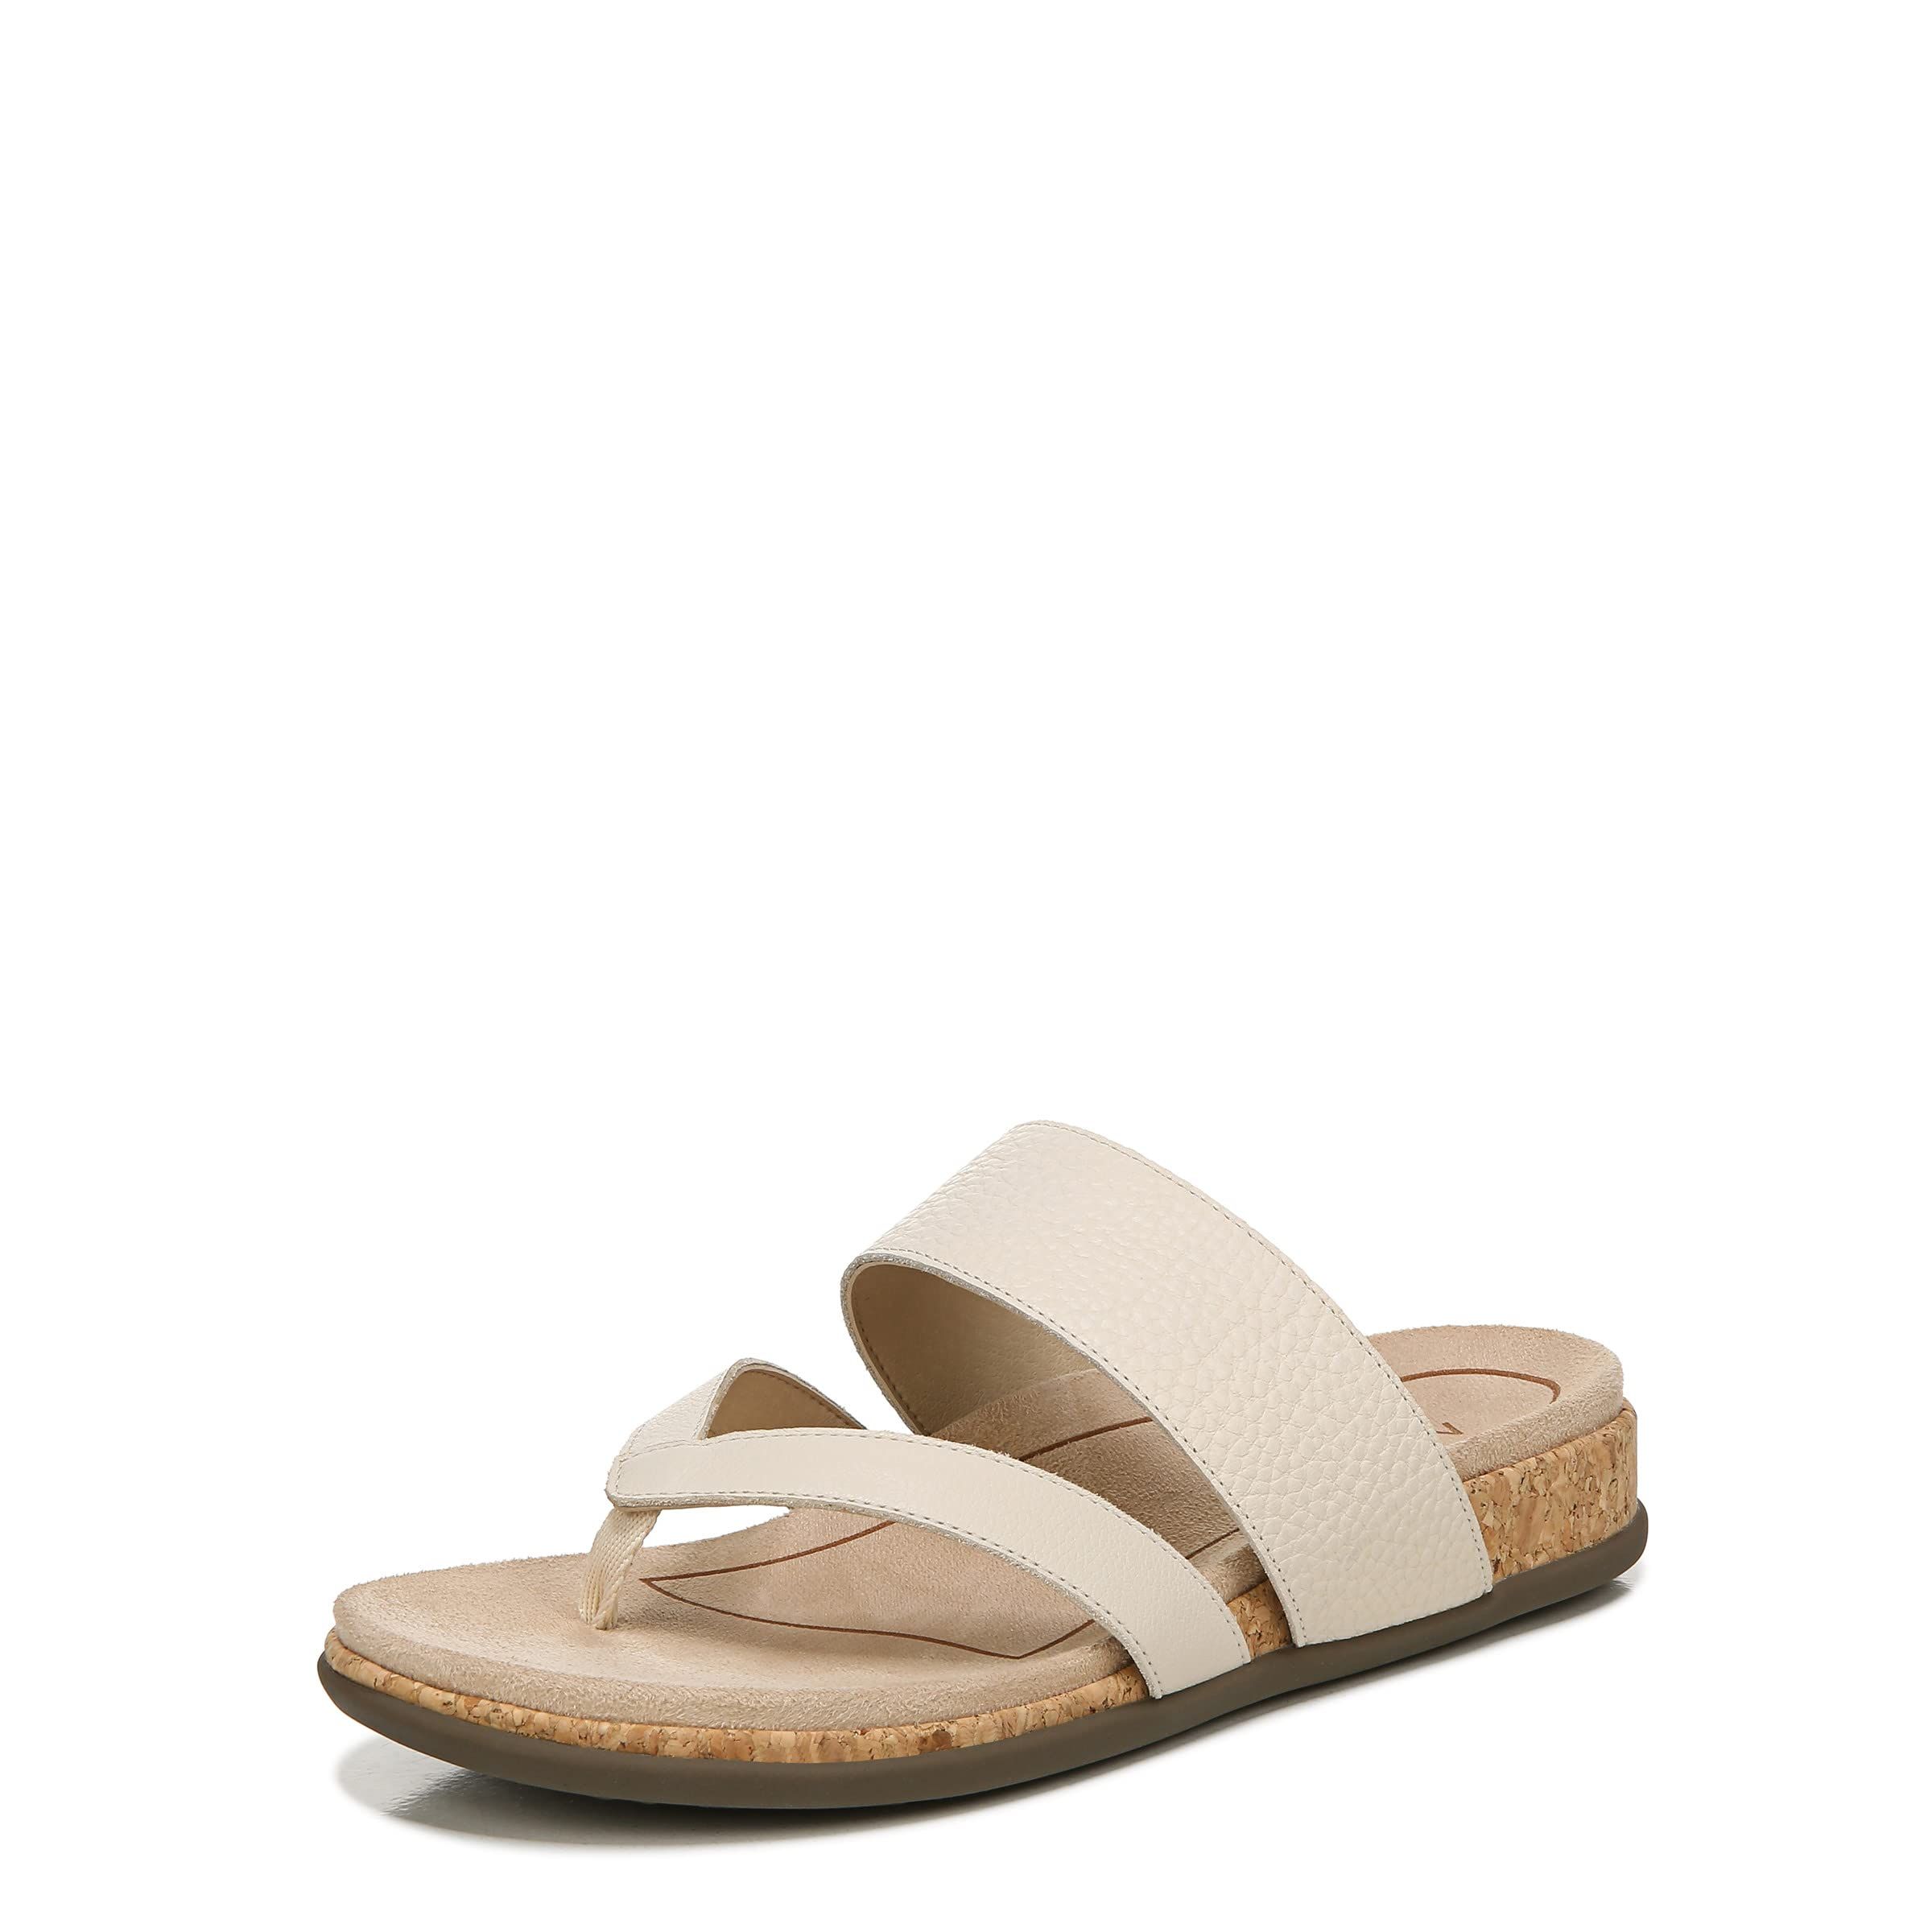 Arch Support Orthopedic Sandals for Women - Shoussy